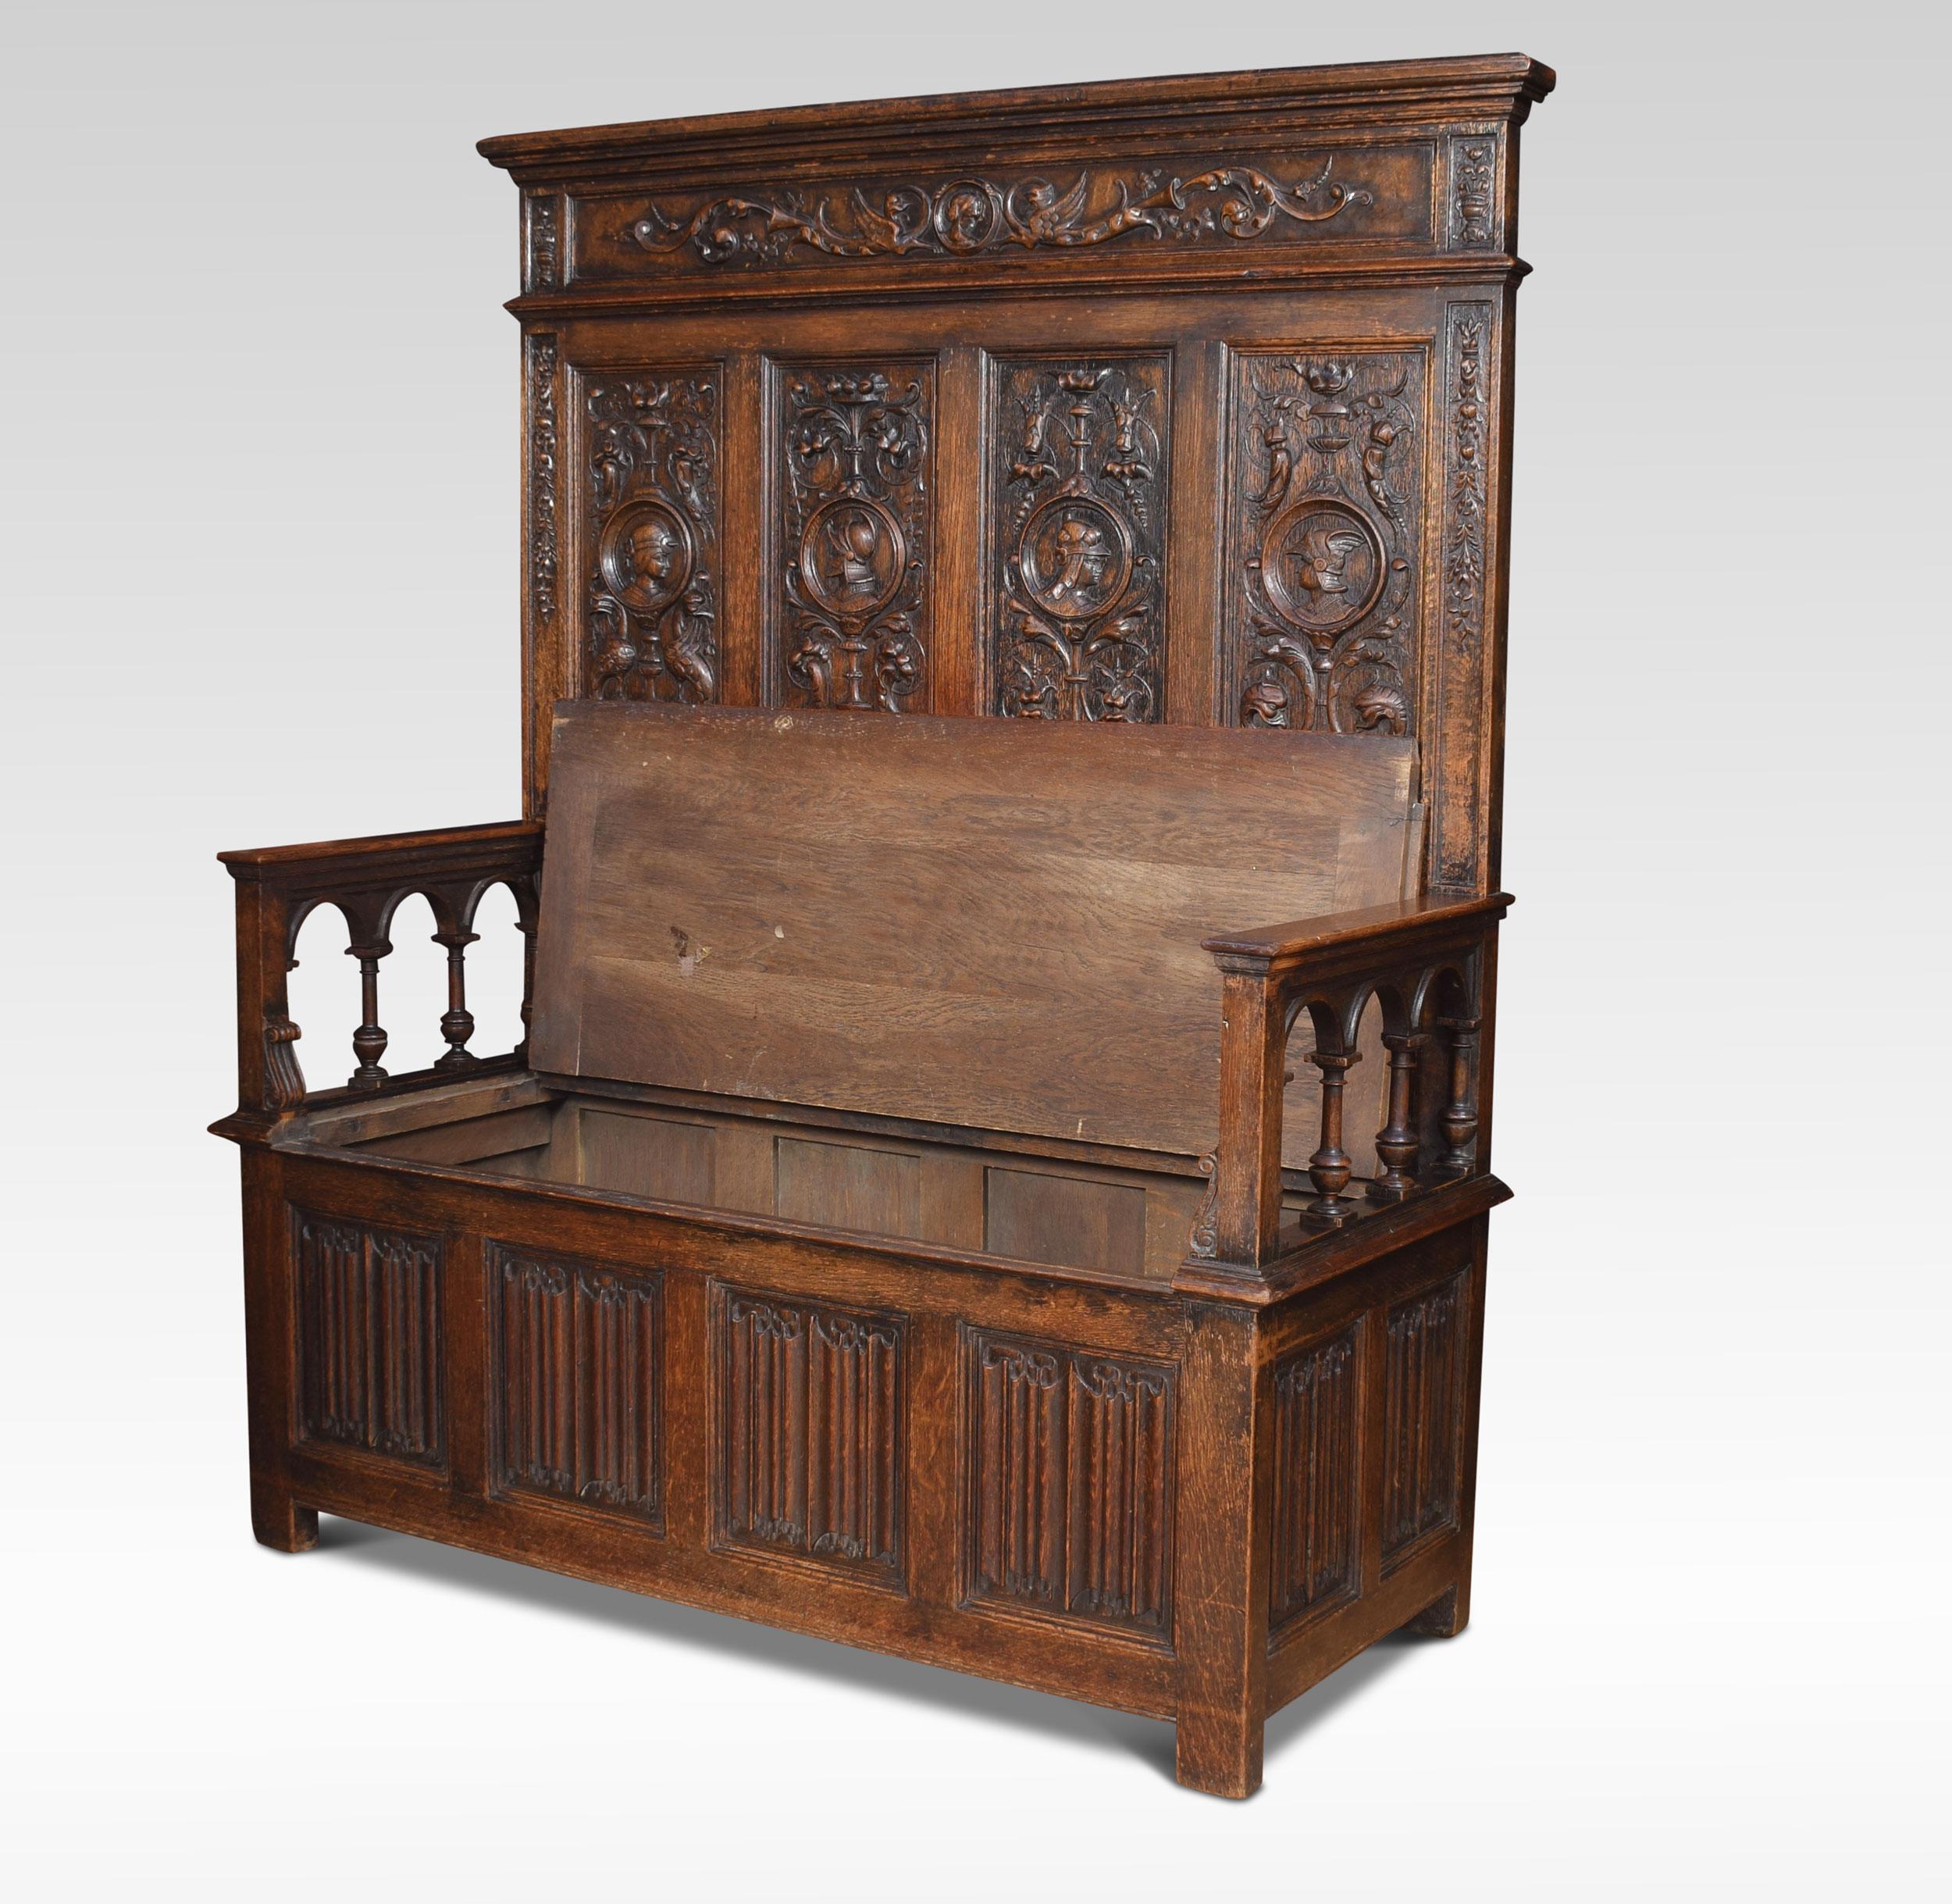 Carved Oak Settle in the 17th Century Style 1